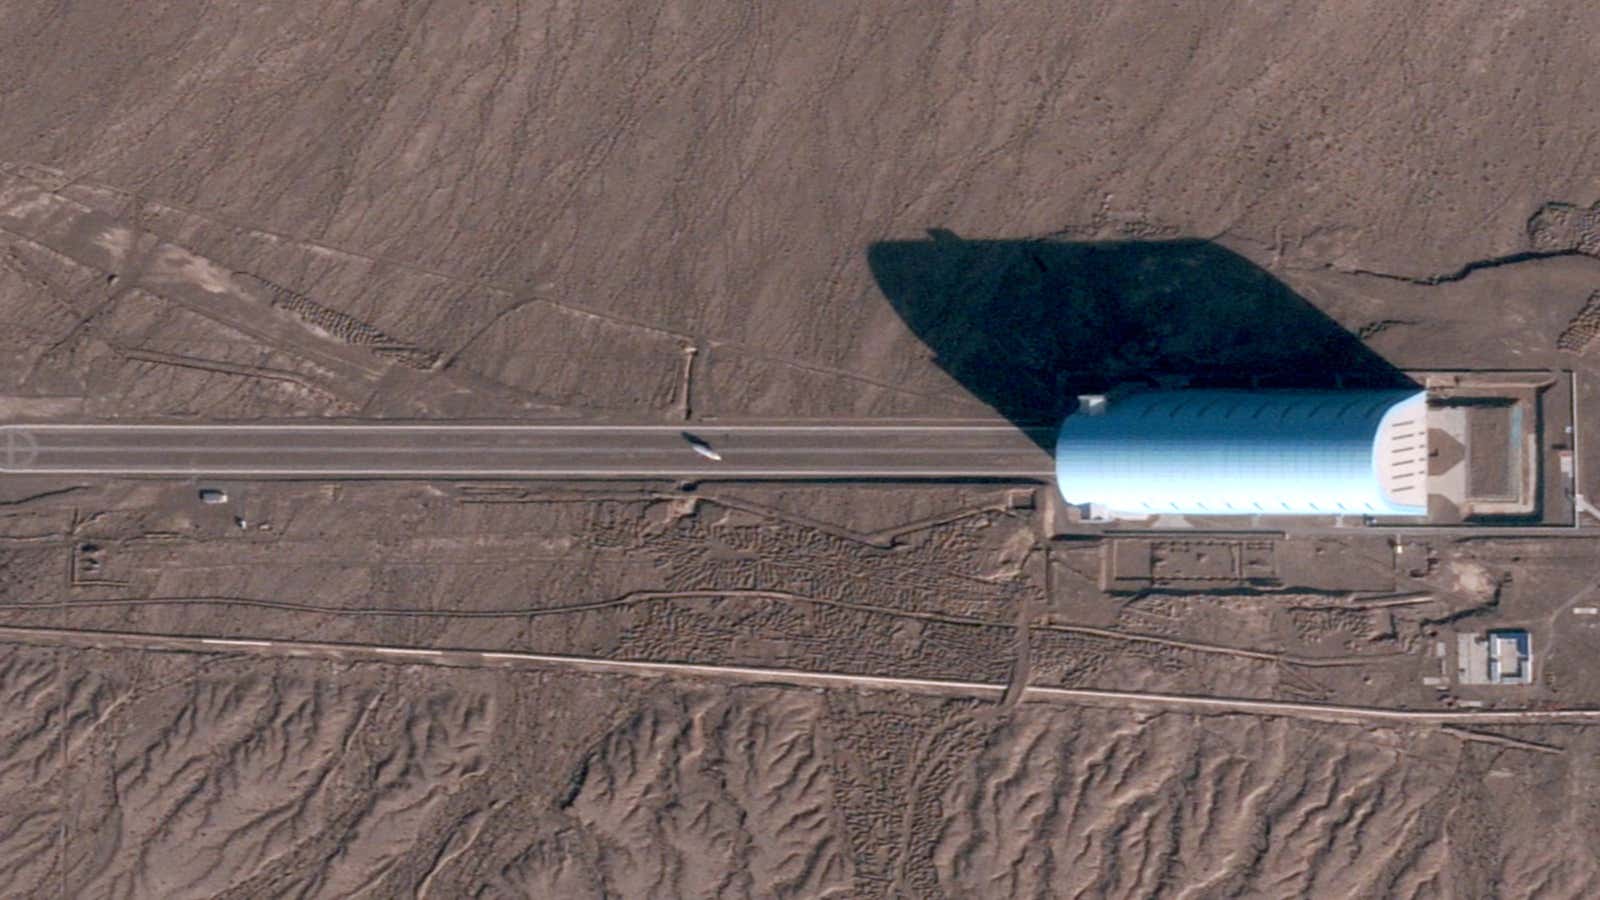 A satellite image captured by the company BlackSky shows a lighter-than-air vehicle at a remote Chinese military research base.